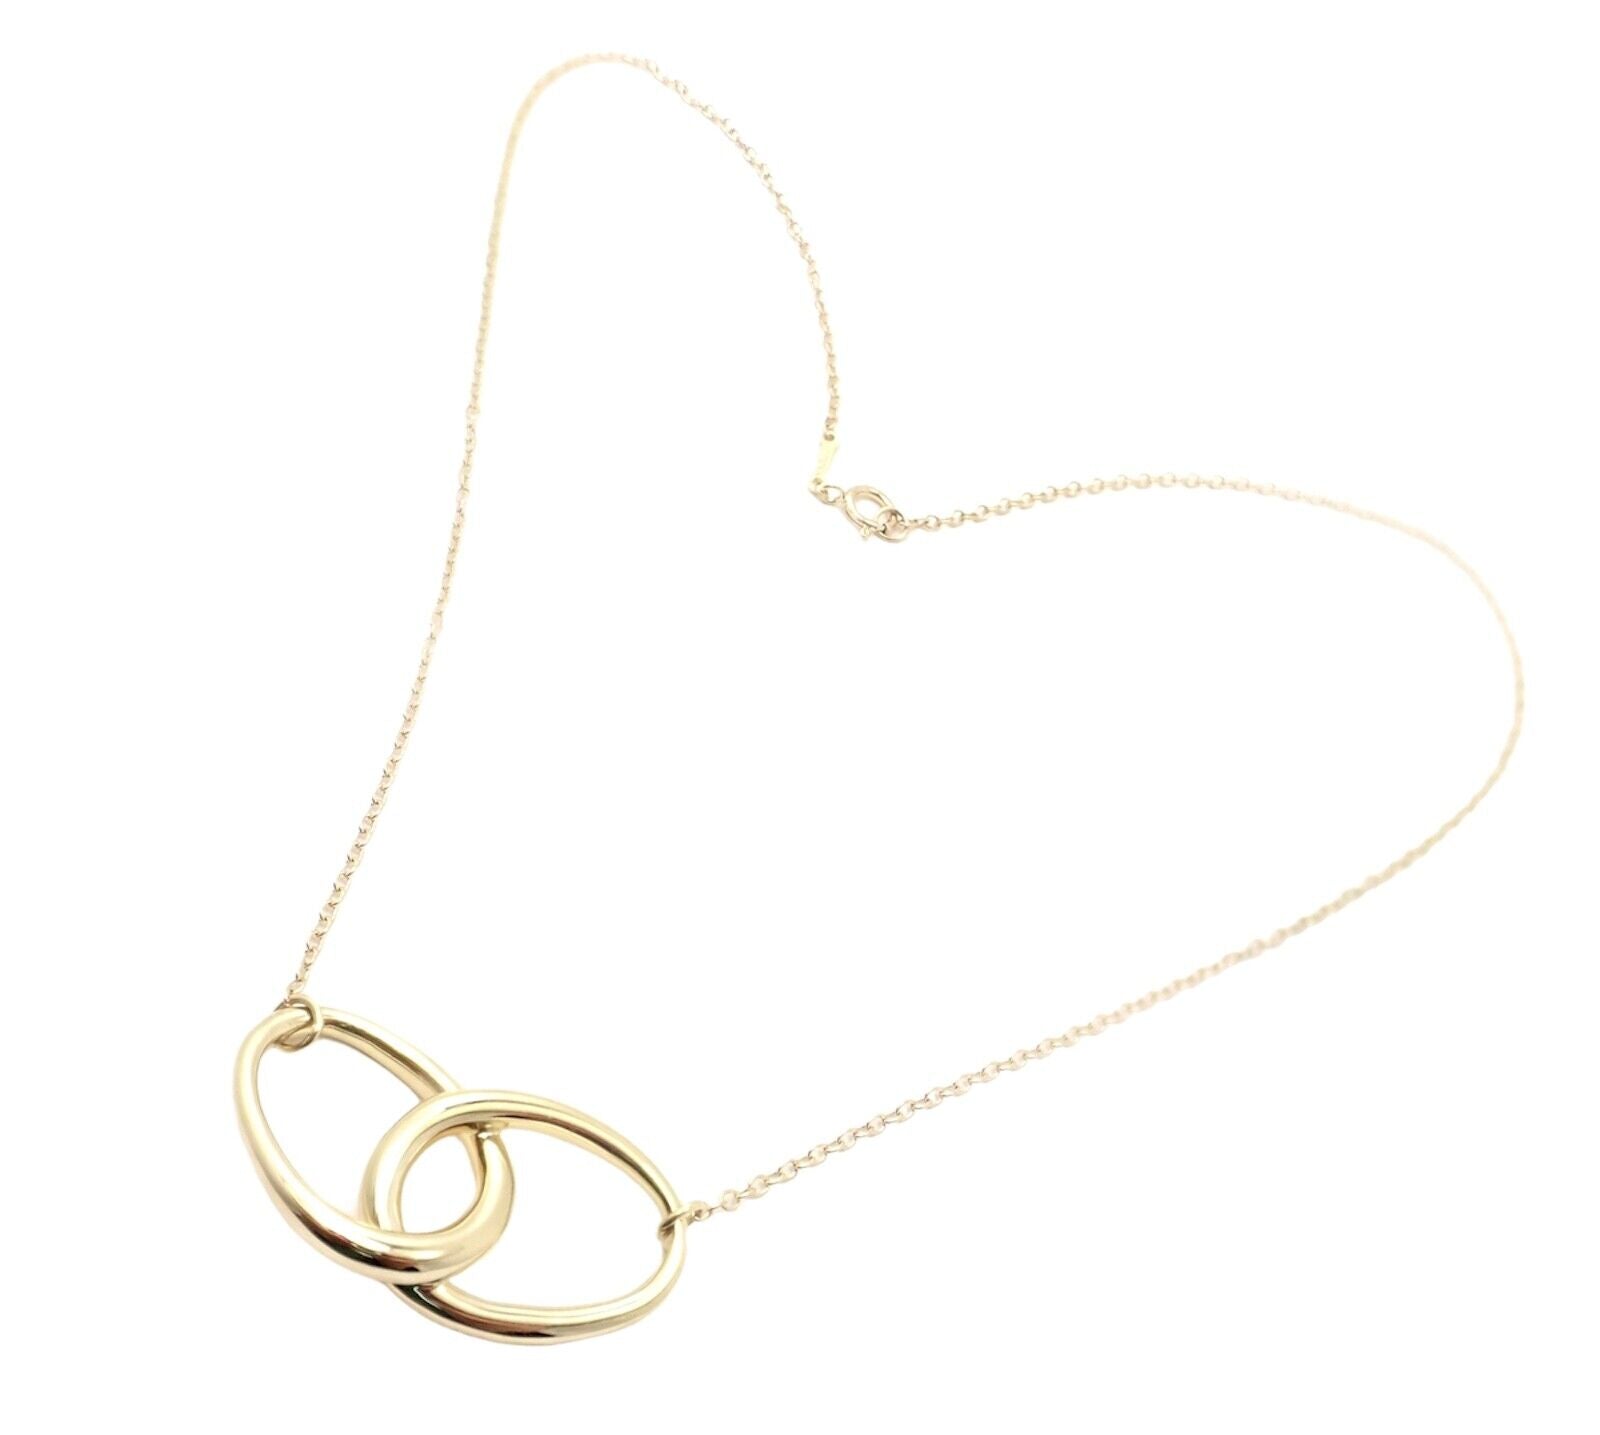 Tiffany & Co. Jewelry & Watches:Fine Jewelry:Necklaces & Pendants Authentic! Tiffany & Co Elsa Peretti 18k Yellow Gold Linked Oval Hugs Necklace